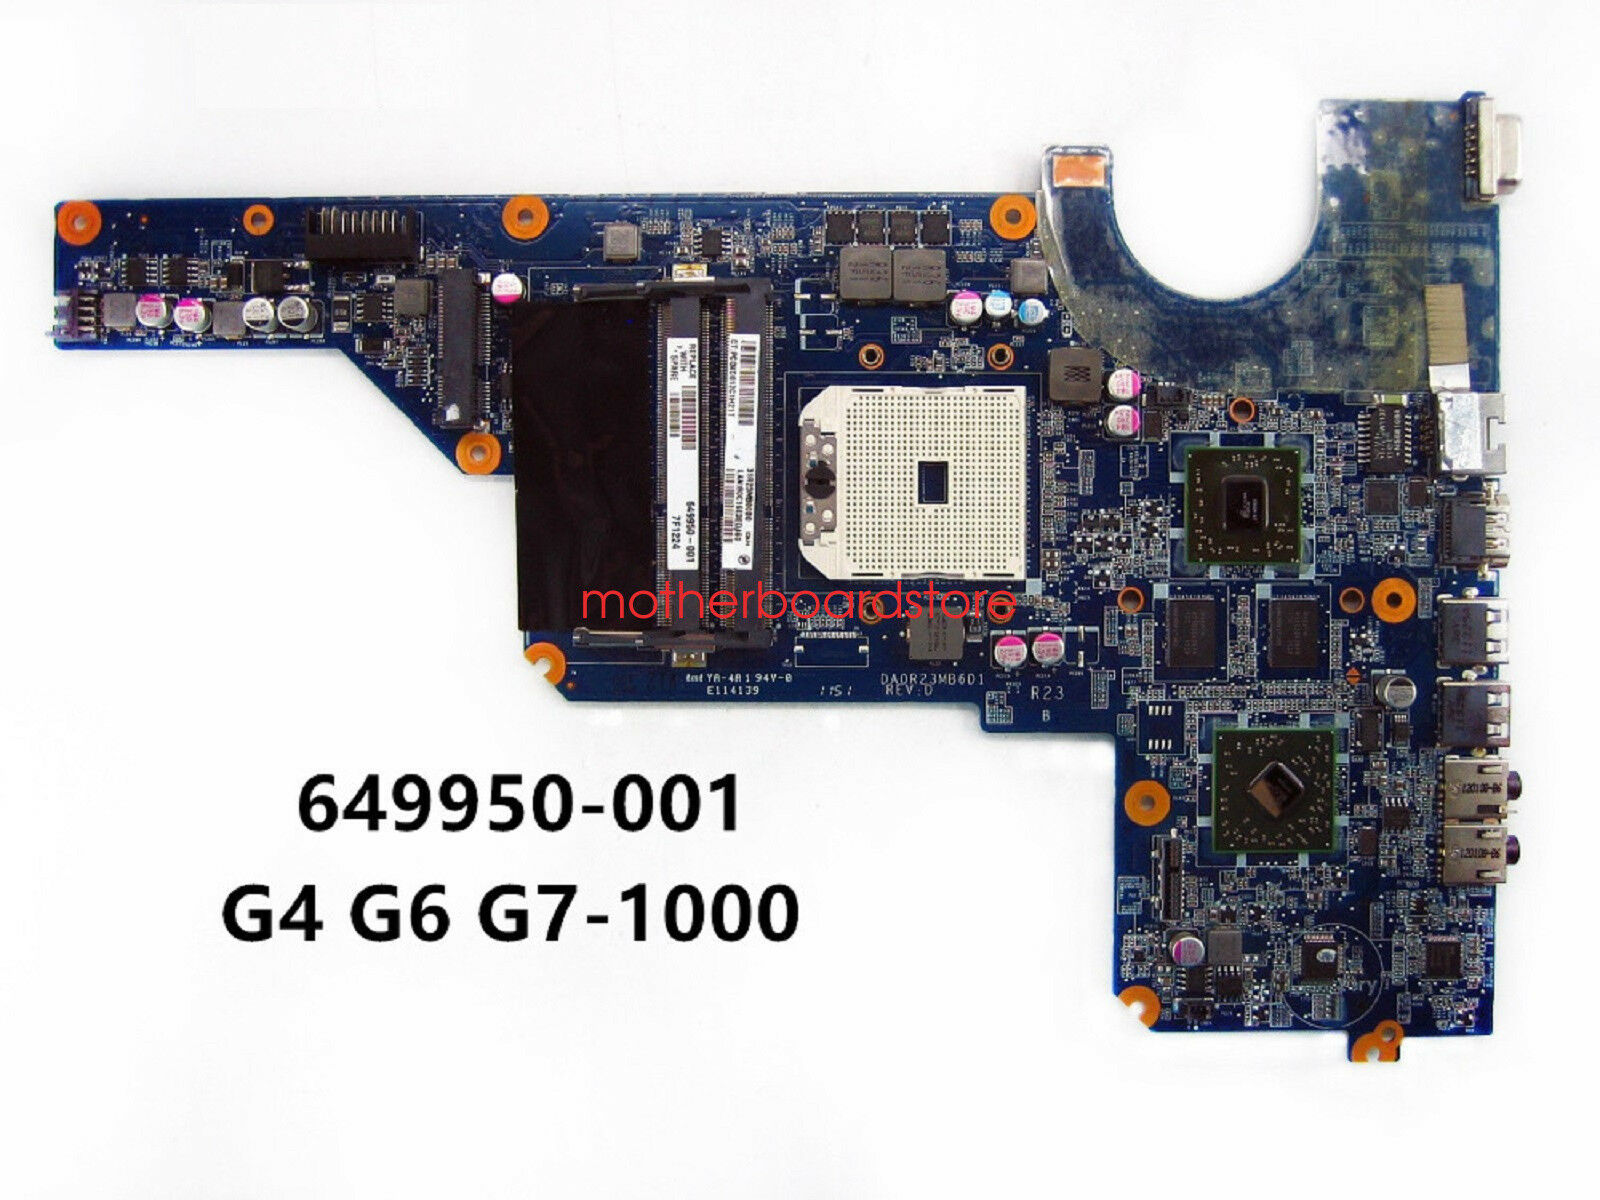 HP G4 G4-1000 G6 G6-1000 G7 G7-1000 AMD Motherboard HD6470/1G 649950-001 Tested Brand: HP Memory Type: DDR